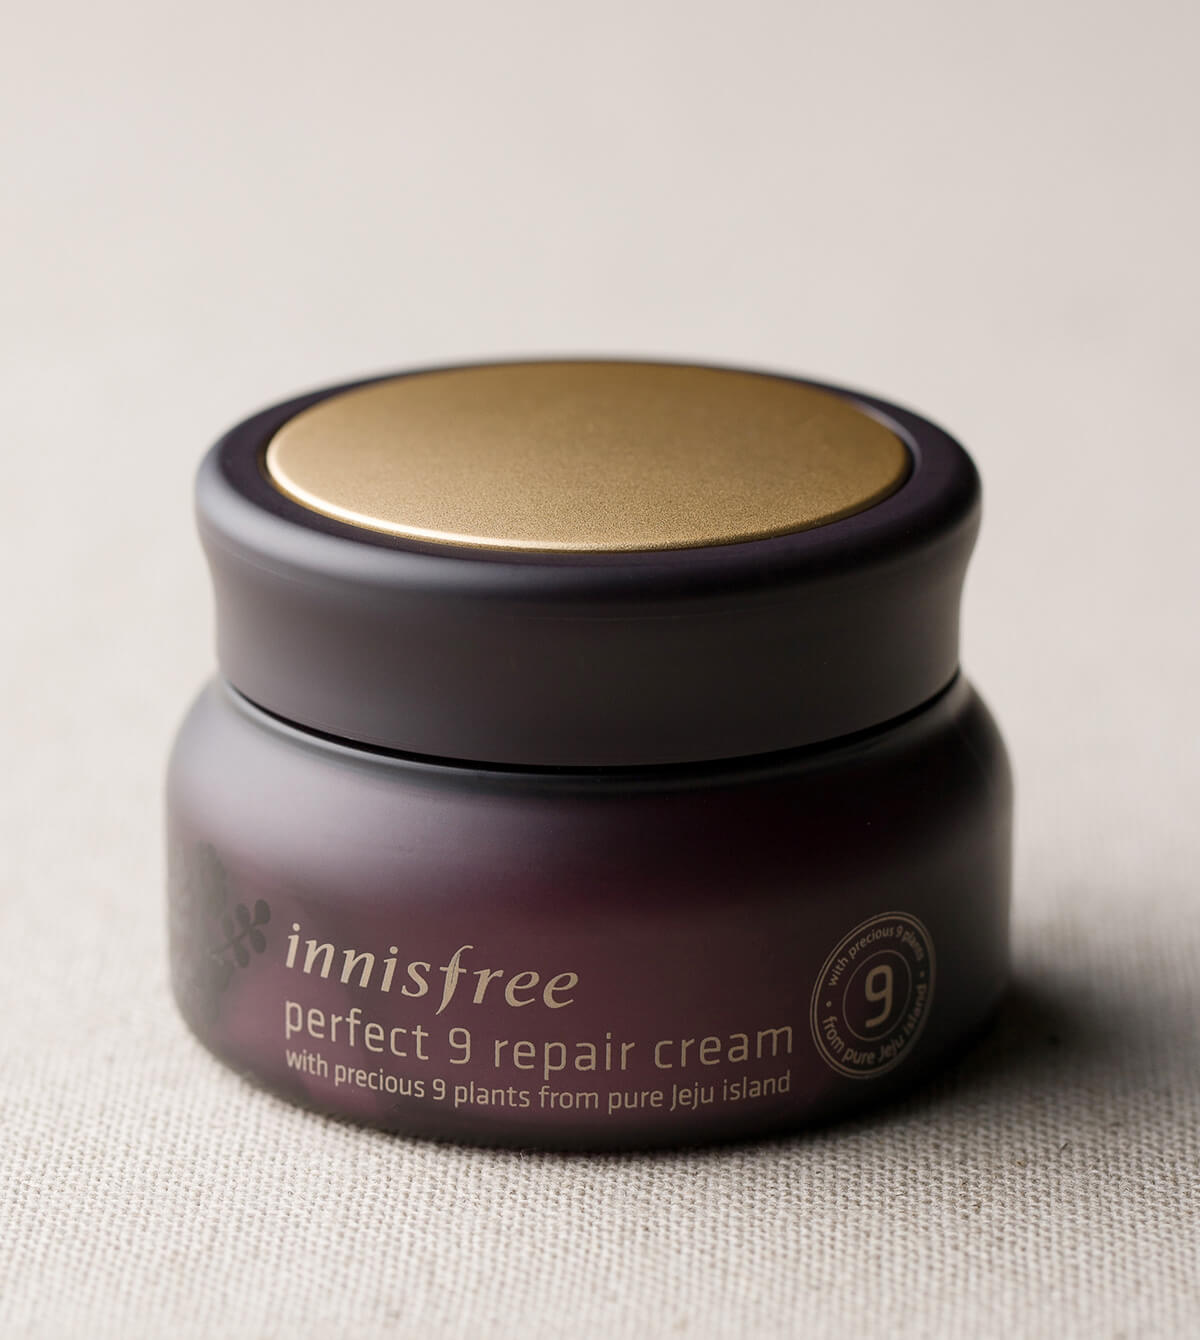 The Best Night Cream For Skin Brightening, Pigmentation And Fairness